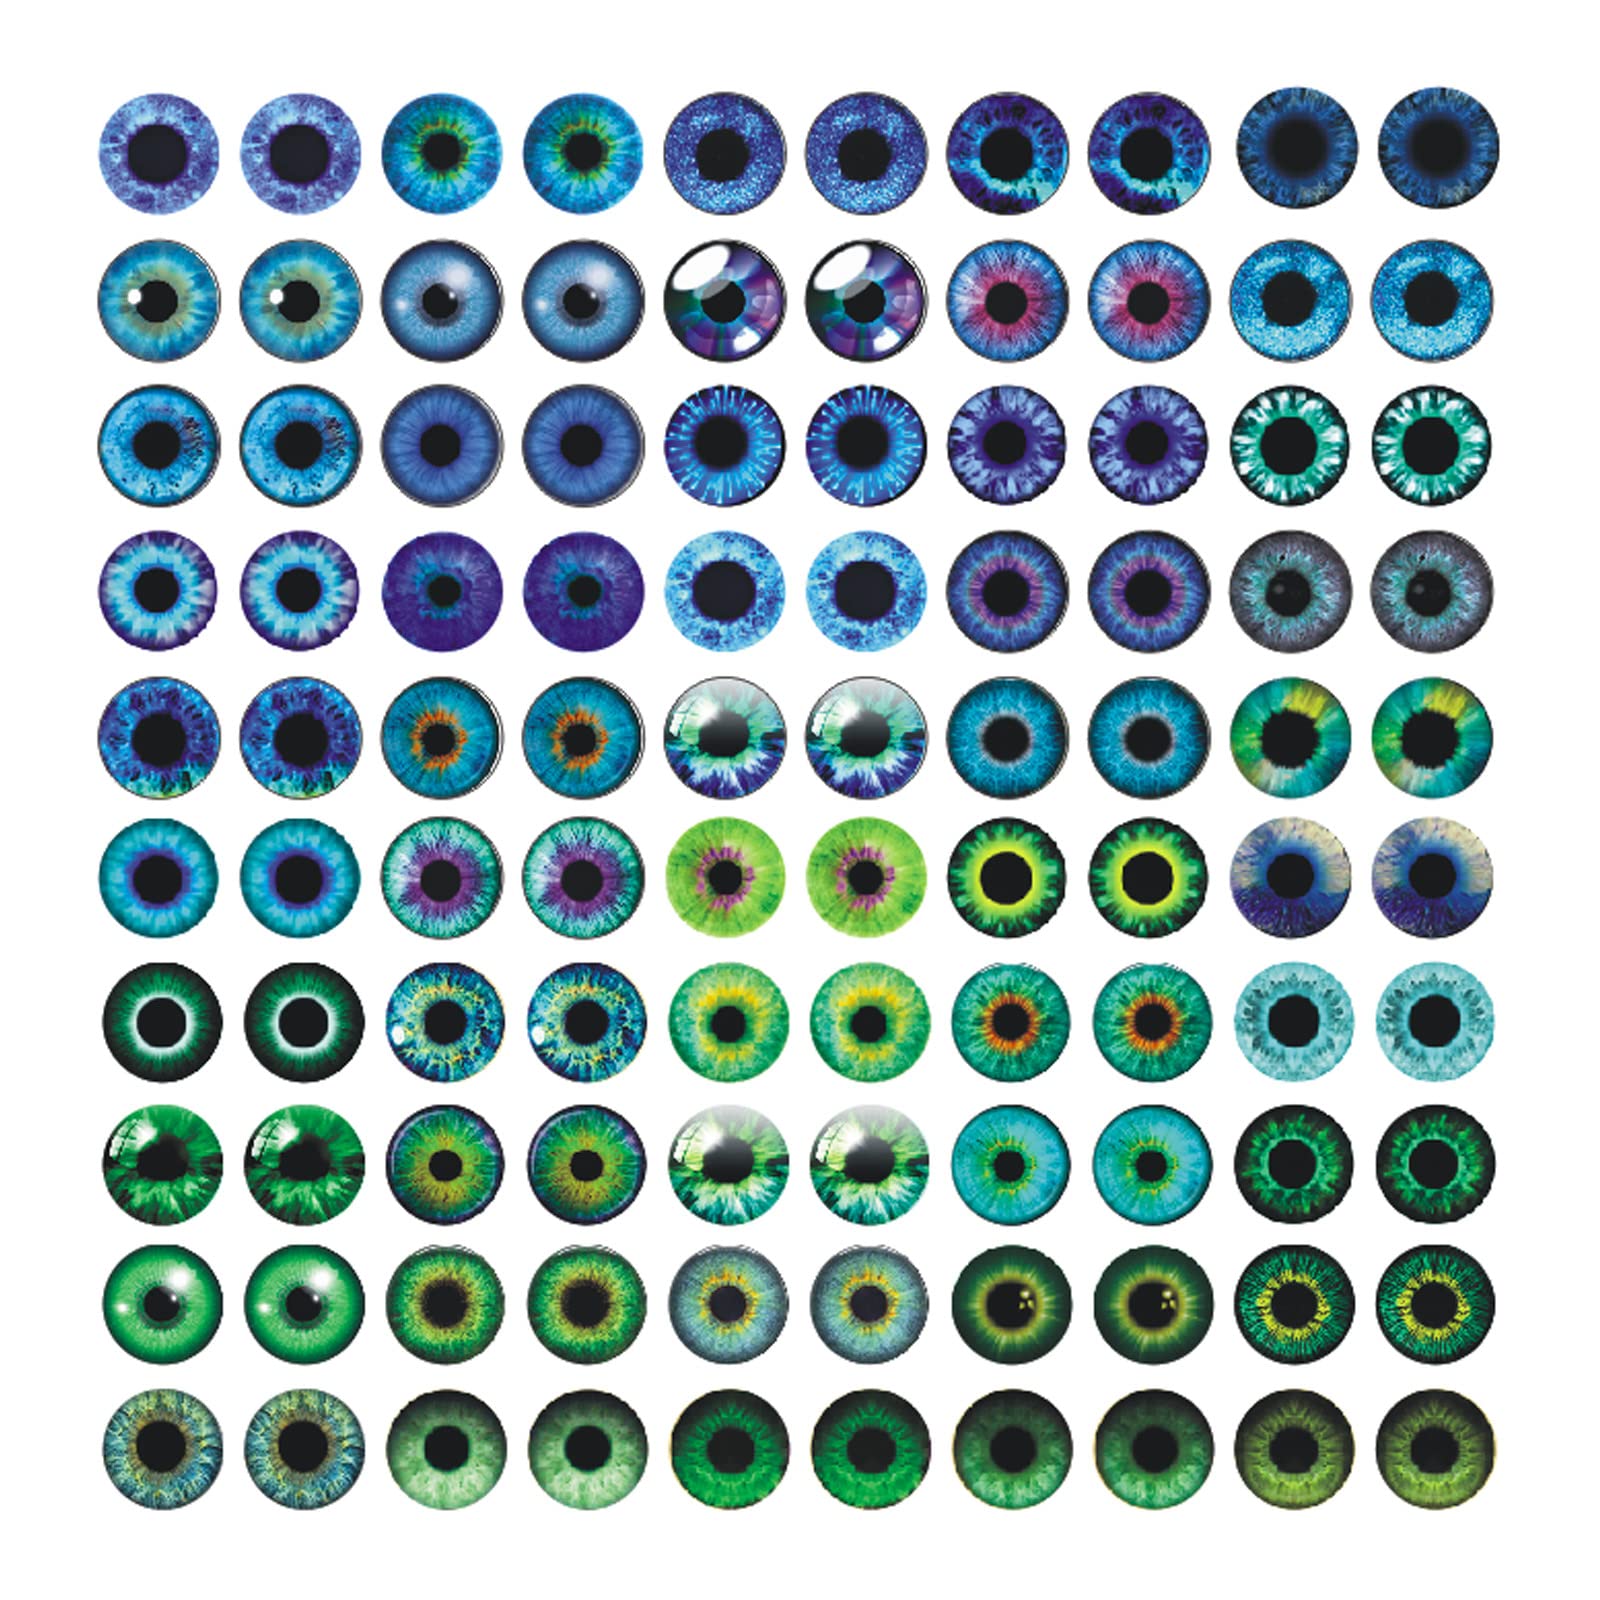 mjjmbc 100PcS Eyes glass cabochon for clay Doll Making Sculptures Props craft DIY Findings Jewelry Making christmas gift